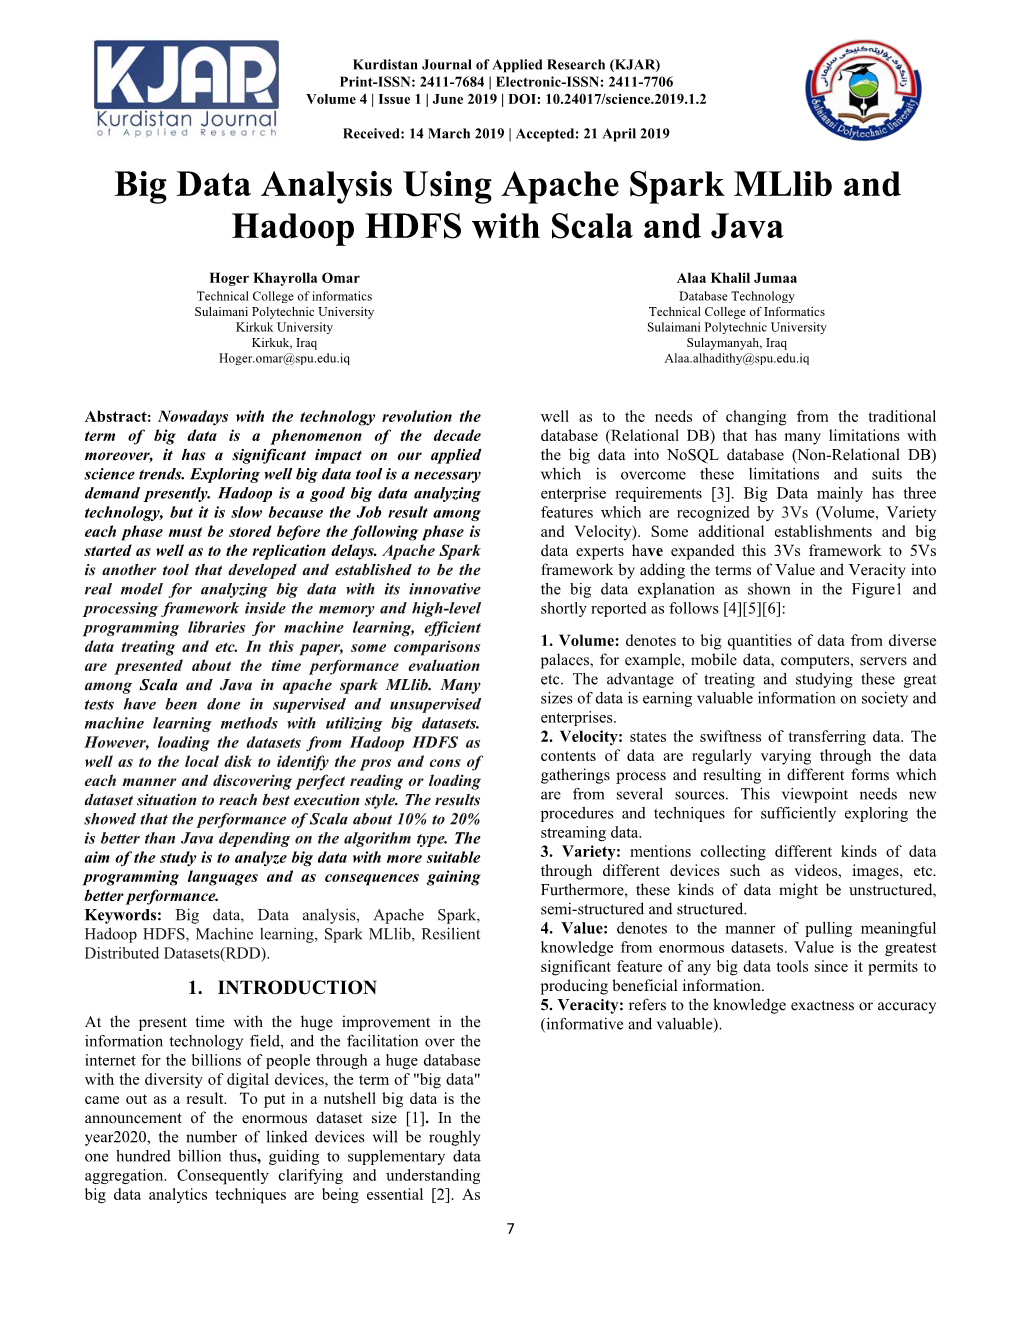 Big Data Analysis Using Apache Spark Mllib and Hadoop HDFS with Scala and Java